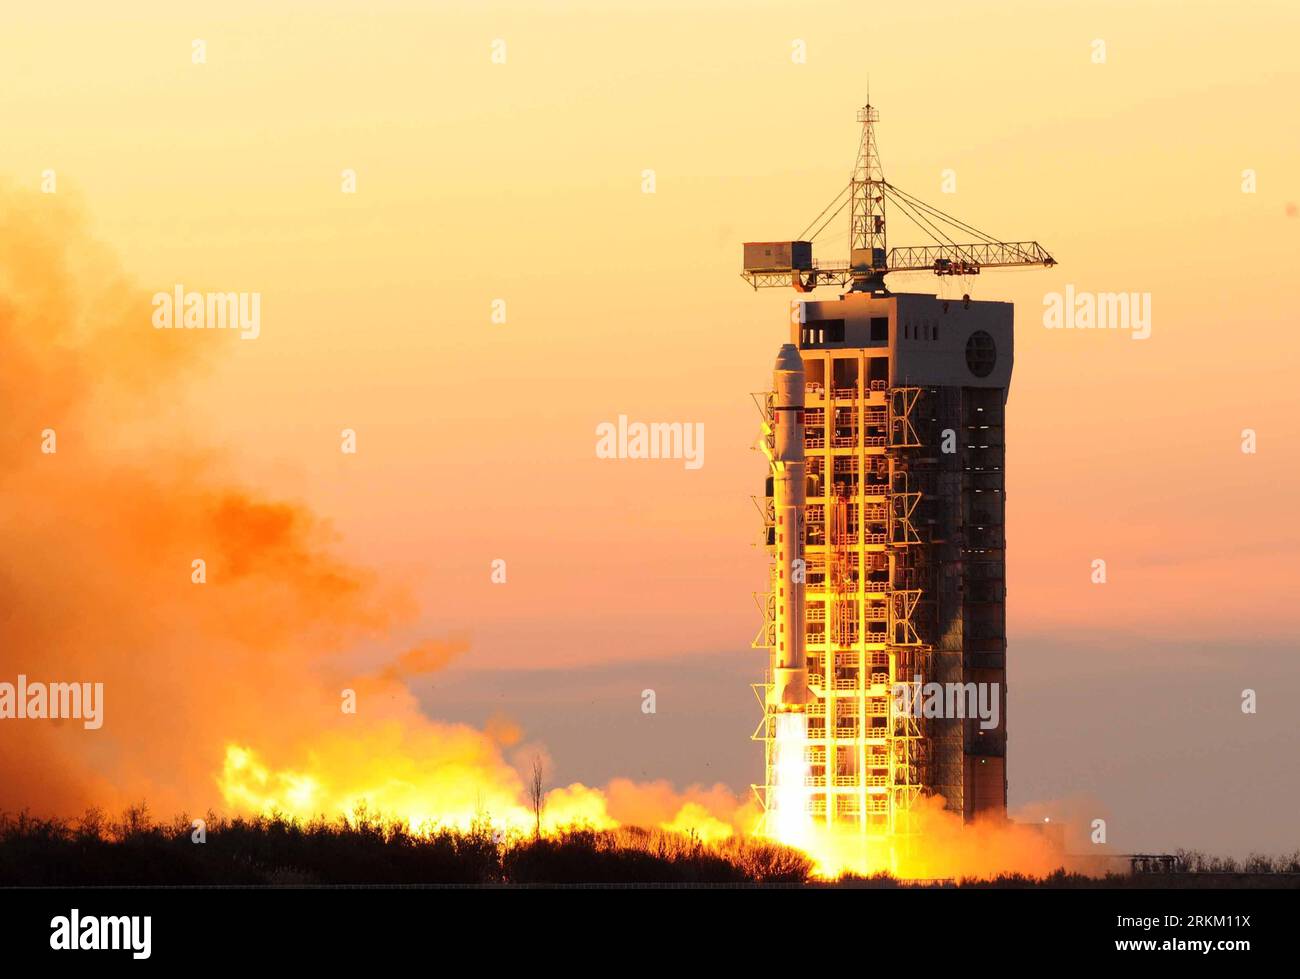 111120 -- JIUQUAN, Nov. 20, 2011 Xinhua -- A Long March 2D carrier rocket carrying Chuangxin 1-03 and Shiyan Satellite 4 blasts off from the launch pad at the Jiuquan Satellite Launch Center in northwest China s Gansu Province, Nov. 20, 2011. The launch was the 151th of China s Long March series of rockets. The Chuangxin 1-03 will be used to collect and relay hydrological, meteorological, and electric power data as well as data for disaster relief. The Shiyan Satellite 4 will be used for space technology experiments and environmental observation. Xinhua/Gong Lei ry CHINA-GANSU-JIUQUAN-SATELLIT Stock Photo